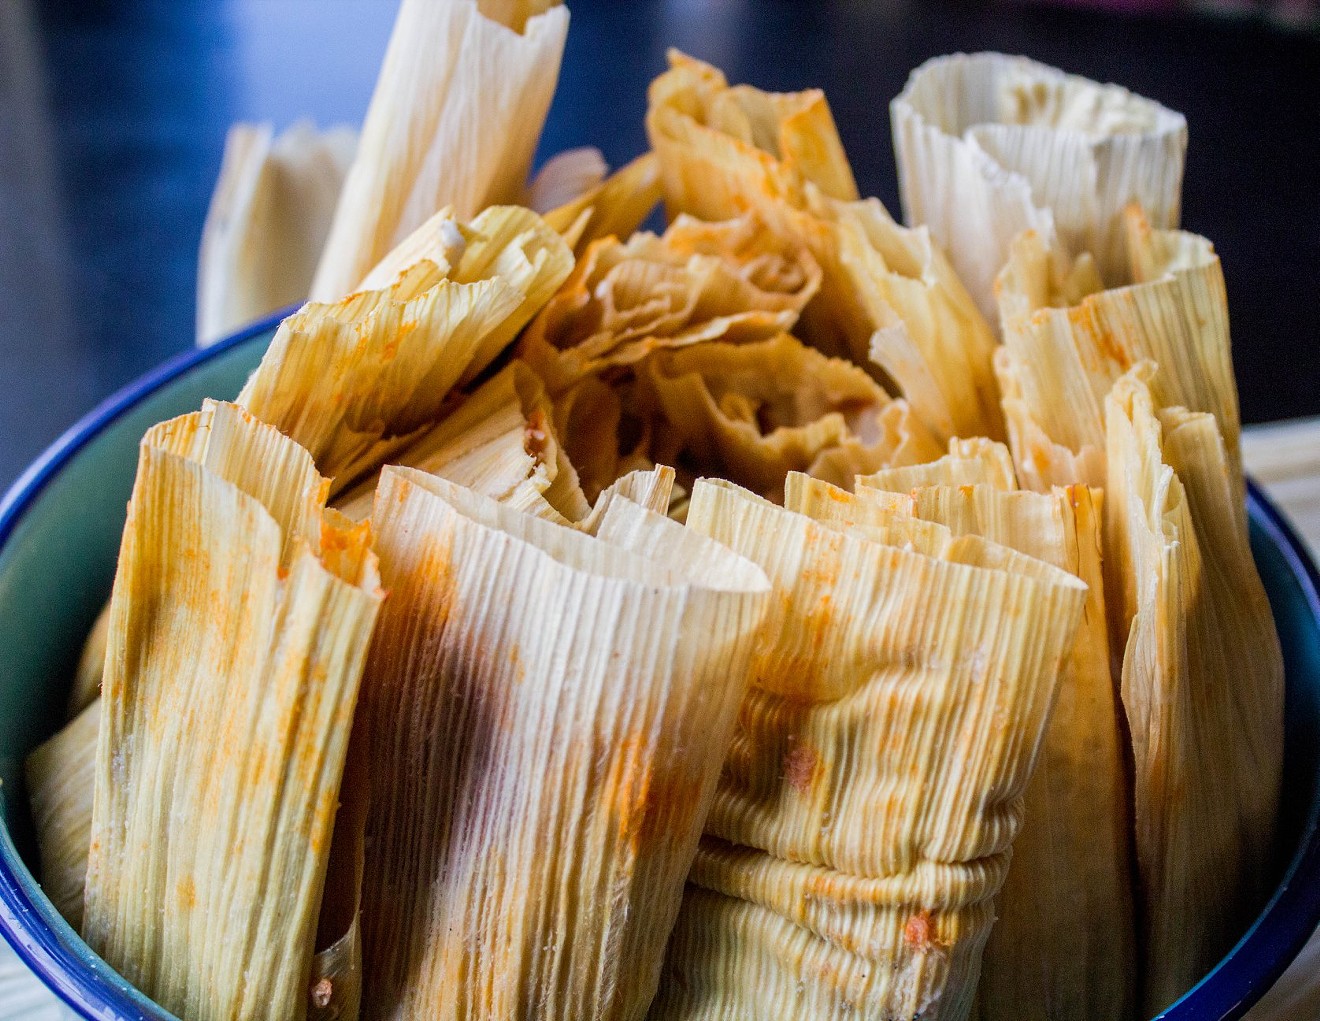 Learn about the history of the wonderful tamale Saturday at the LCC.